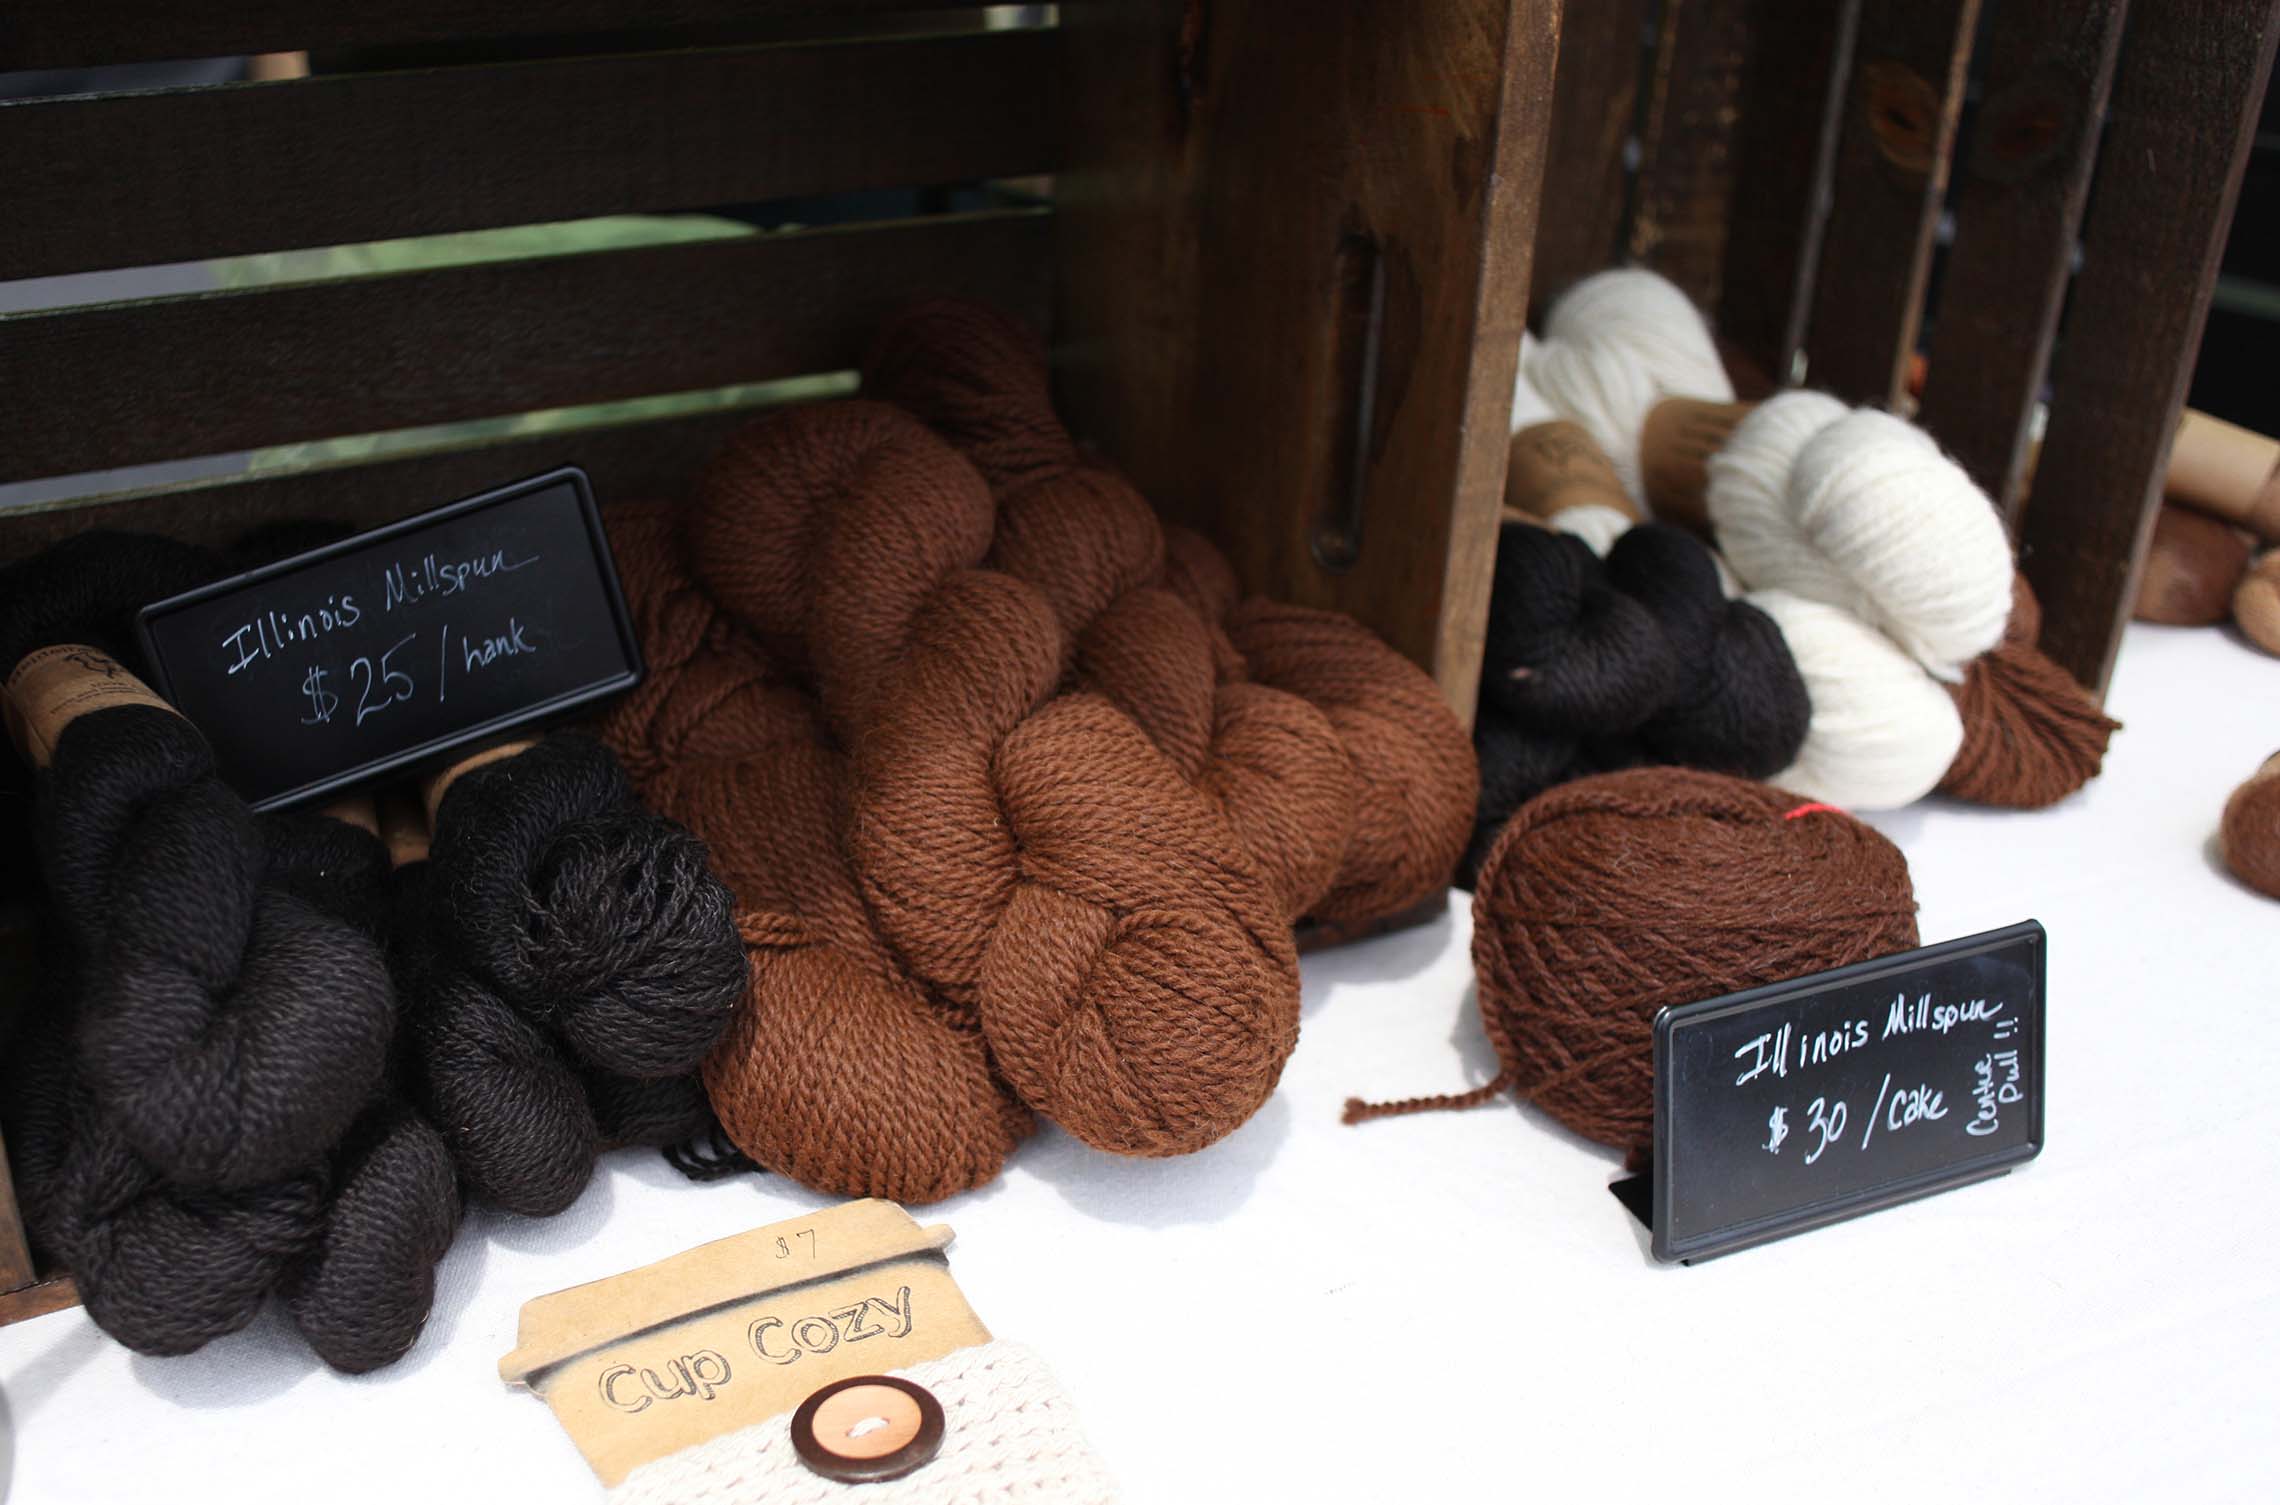  Yarn spun from alpaca fibers is sold Saturday during the Kankakee Farmers Market in downtown Kankakee. Alpacas on Heidelberr farm are raised in a sustainable and holistic way by Leslie McHugh and her family.    